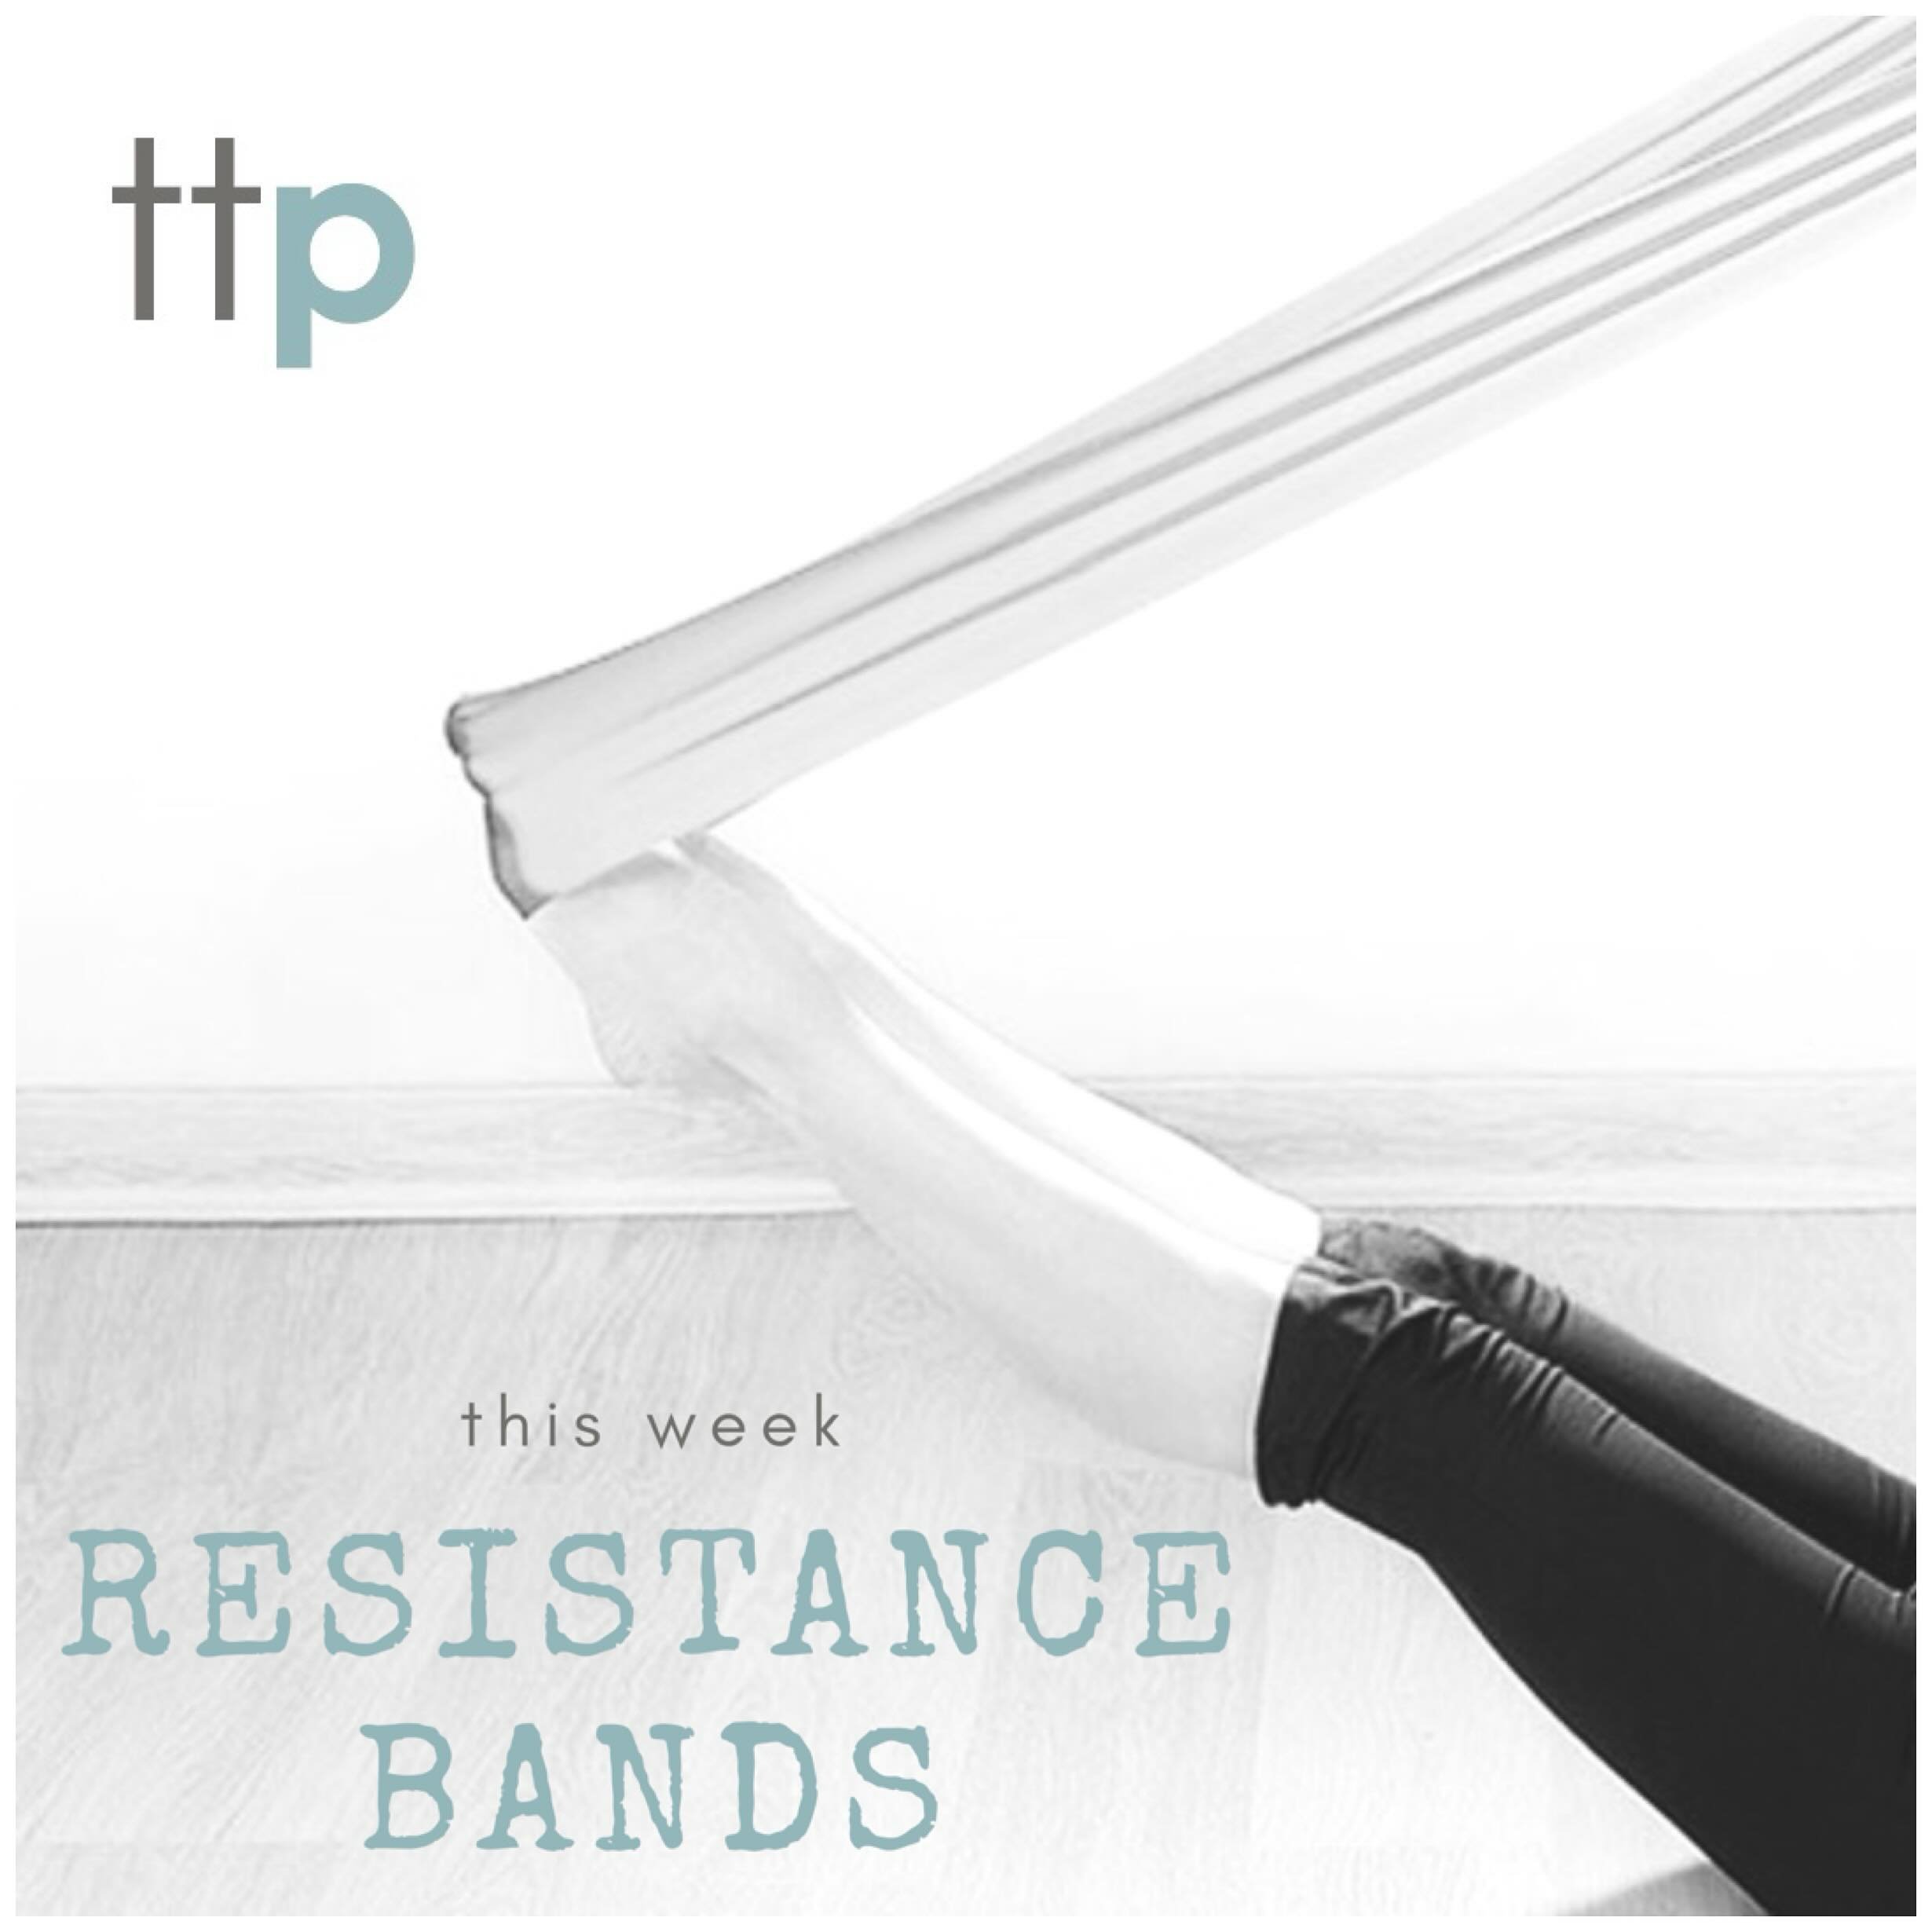 Each week in our face-to-face group matwork classes, we add a different piece of small equipment.

It&rsquo;s resistance bands this week, to resist, assist, stretch, and support us.
.
.
.
#resistancebands #pilates #pilatesclasses #pilatesstudio #pila